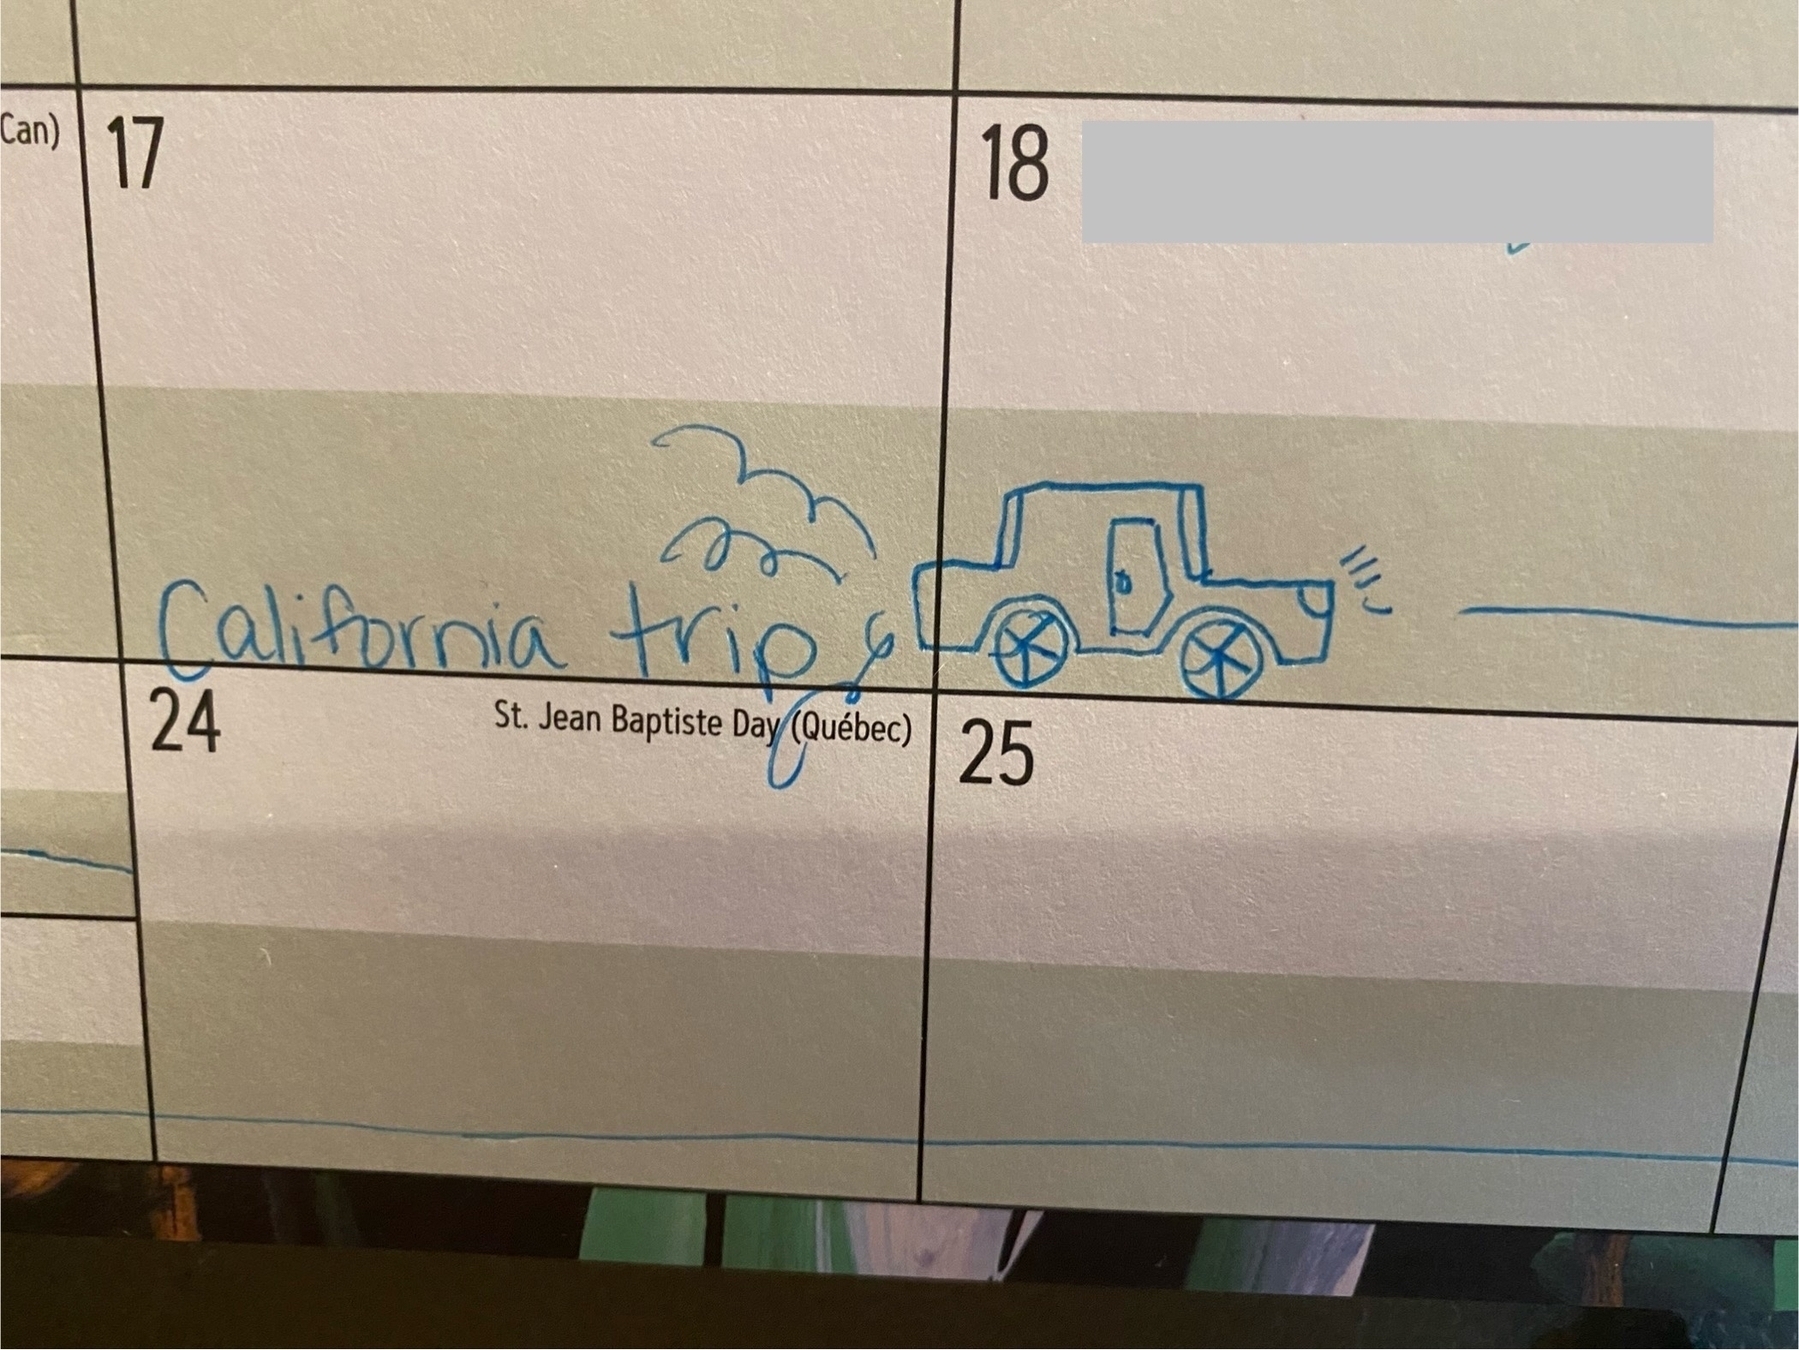 A hand drawn car on a calendar with swooshes behind it indicating it moving forward with the words California Trip written behind it.